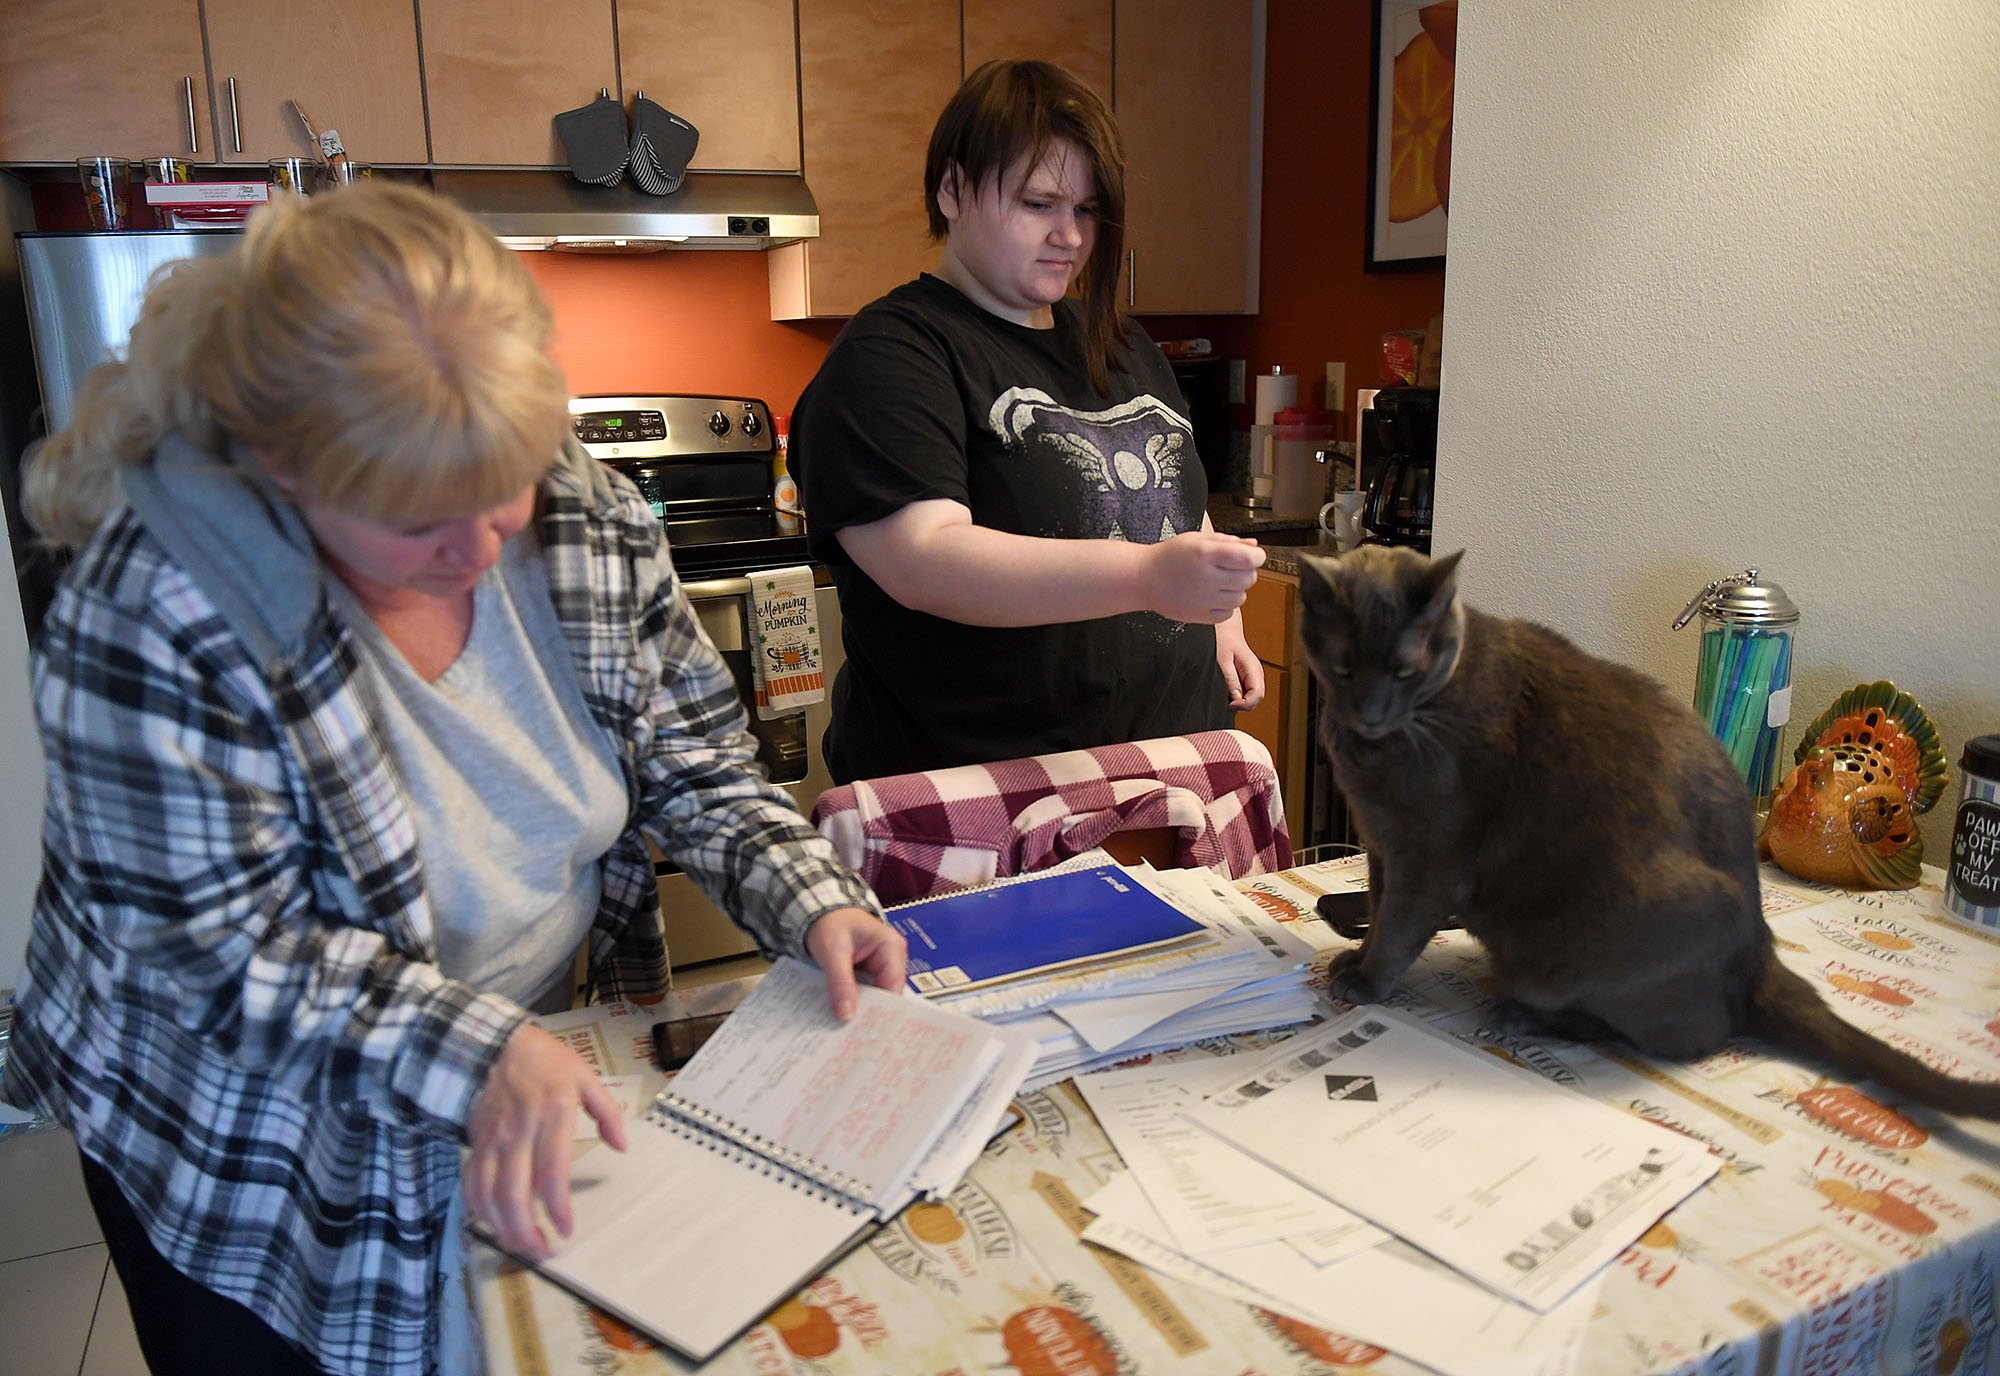  Sandra Fetters looks through her notes as her daughter plays with their cat Earl at the Residence Inn Mystic in Groton Monday, October 31, 2022. Sandra, her two daughters and three cats have been at the hotel since leaving their apartment at Branfor